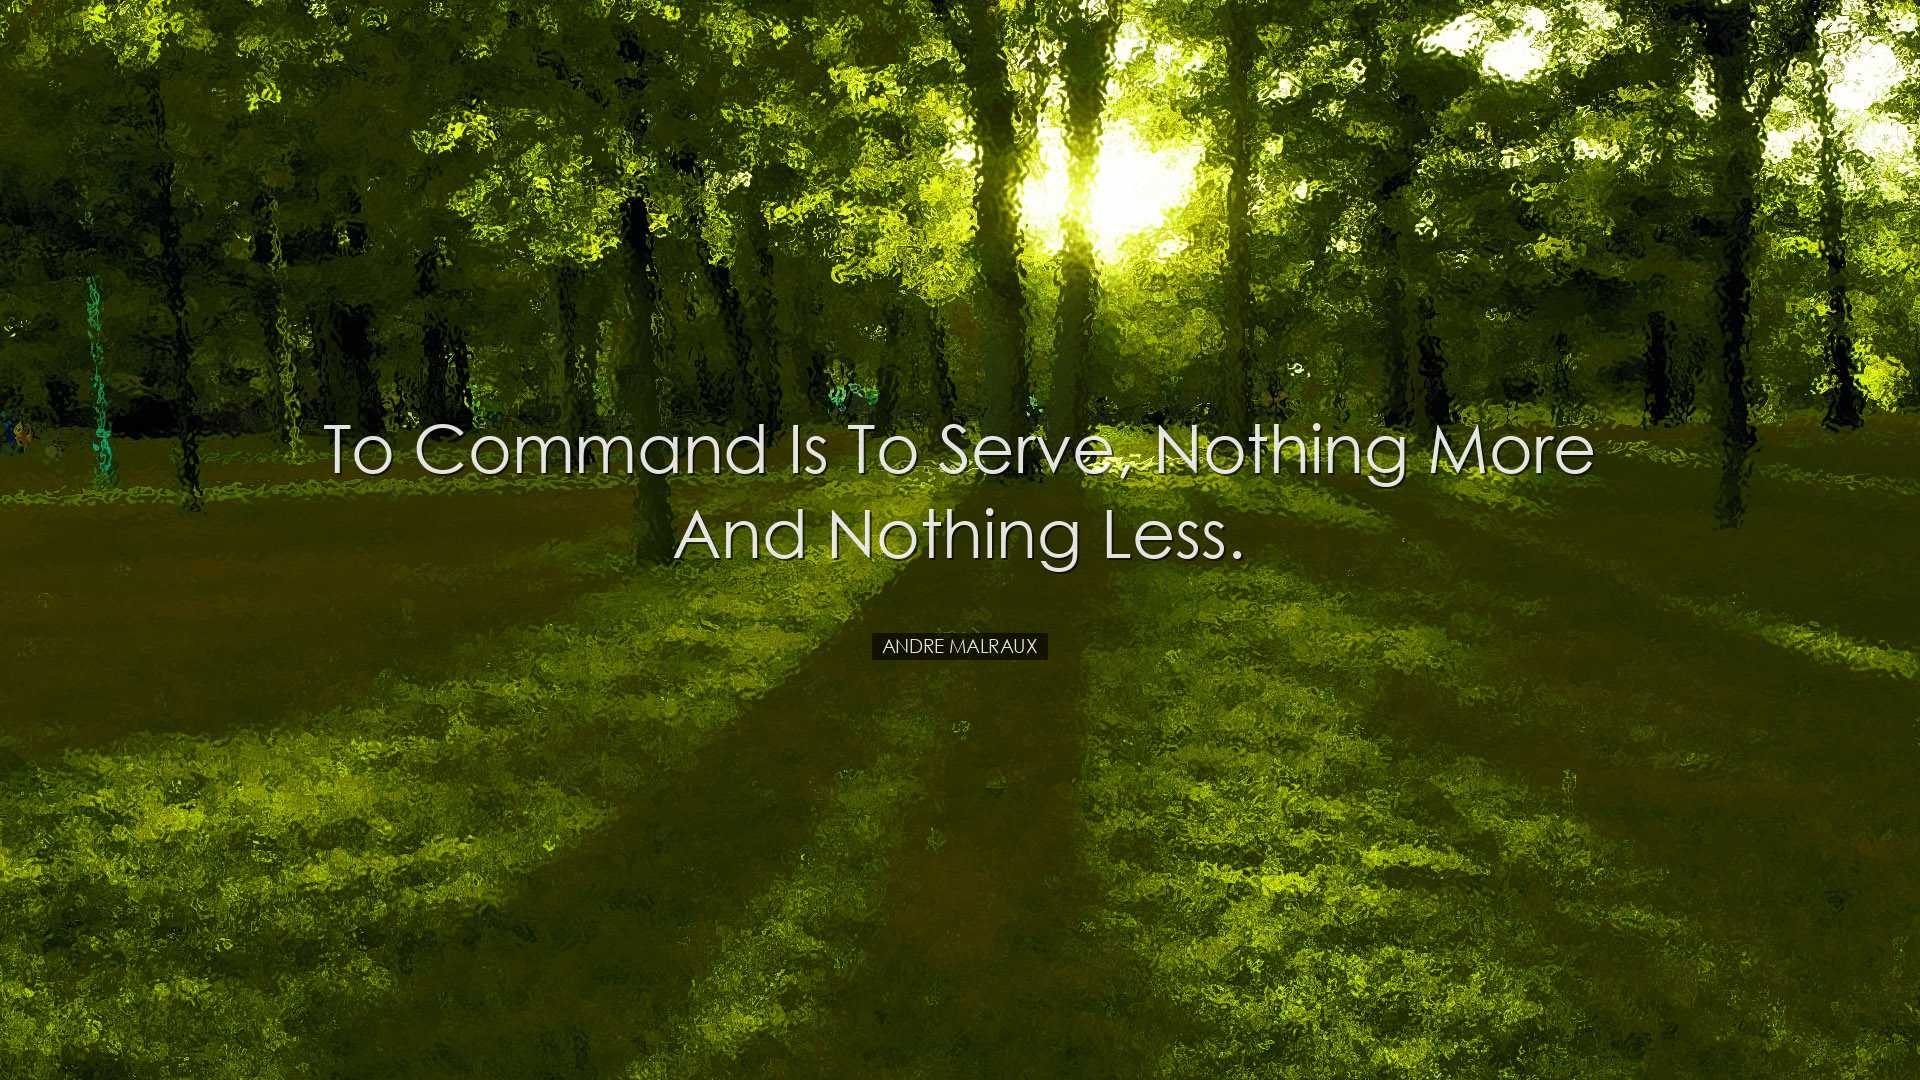 To command is to serve, nothing more and nothing less. - Andre Mal